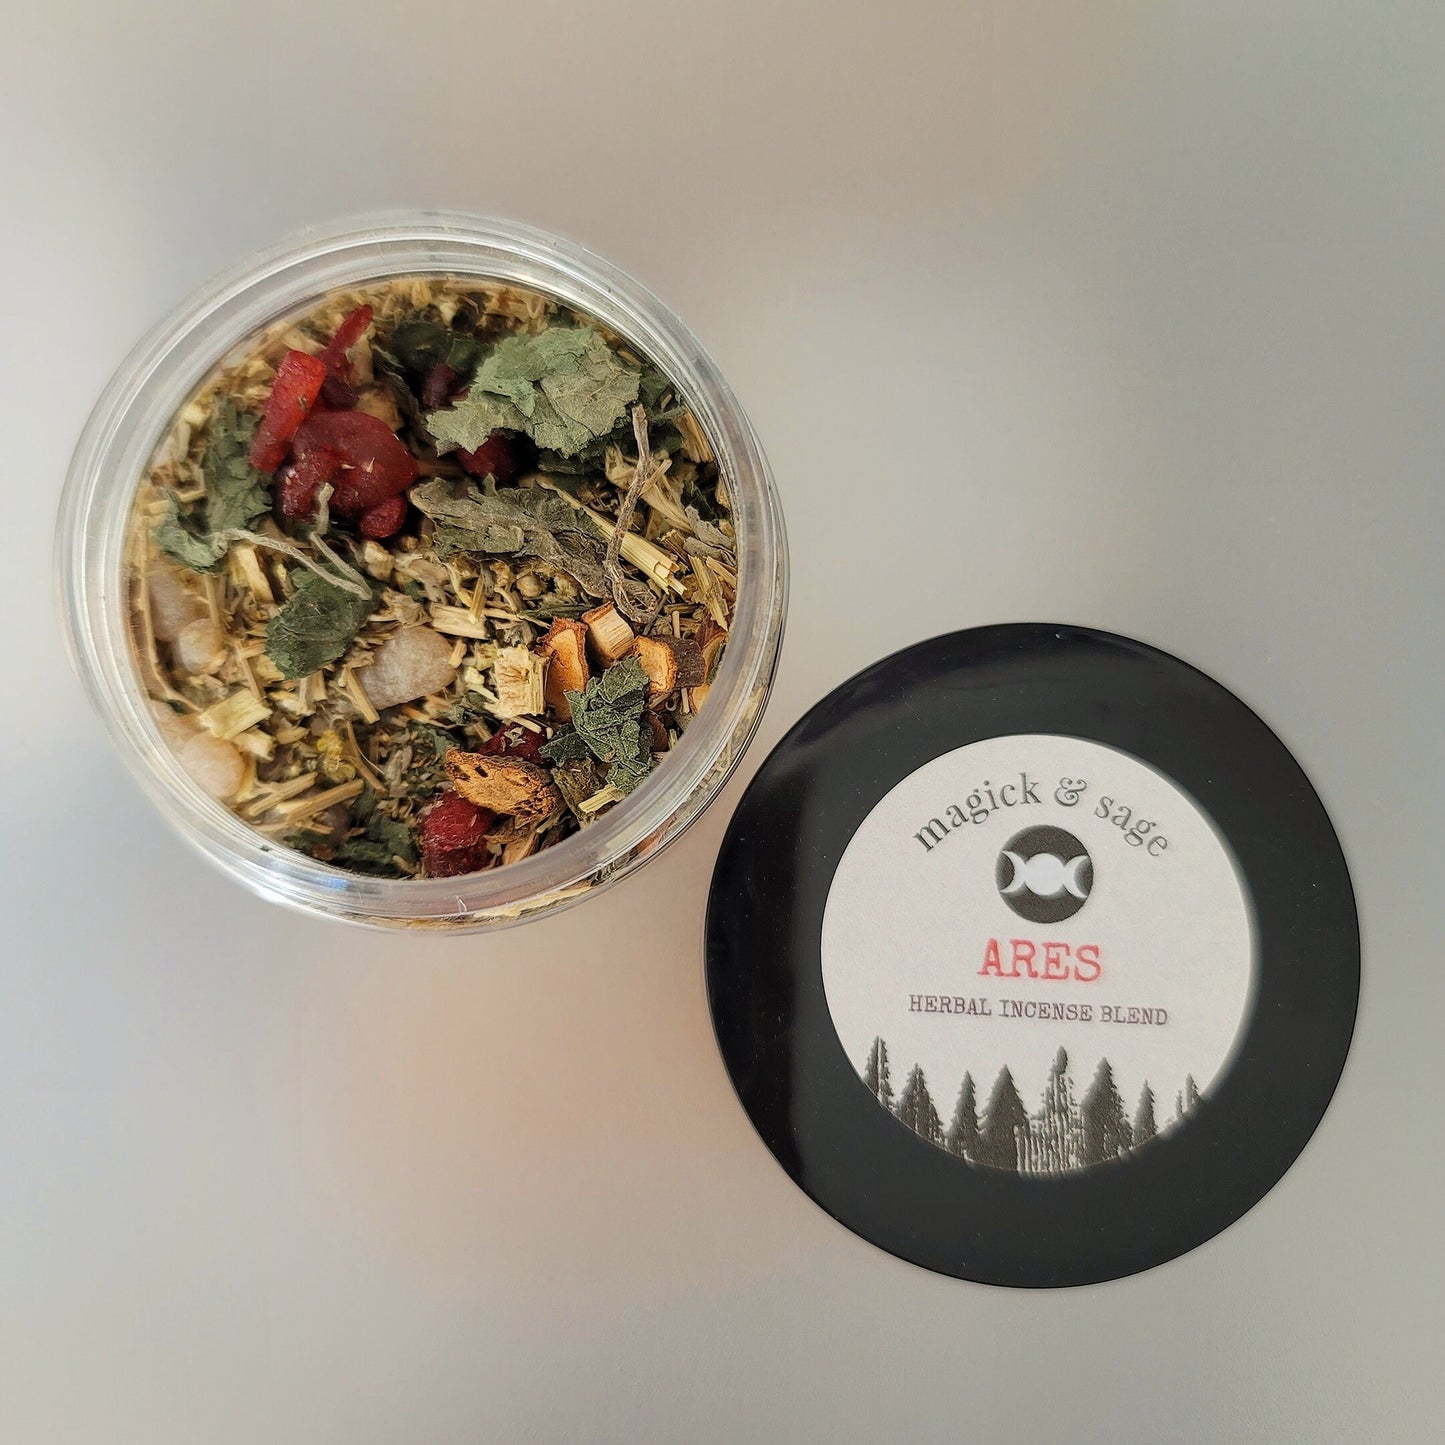 ARES Herbal Incense Blend - work, connect, and honor Ares - God of War and Courage, Battlelust, Civil Order - Mars - Shrine & Altar Tools